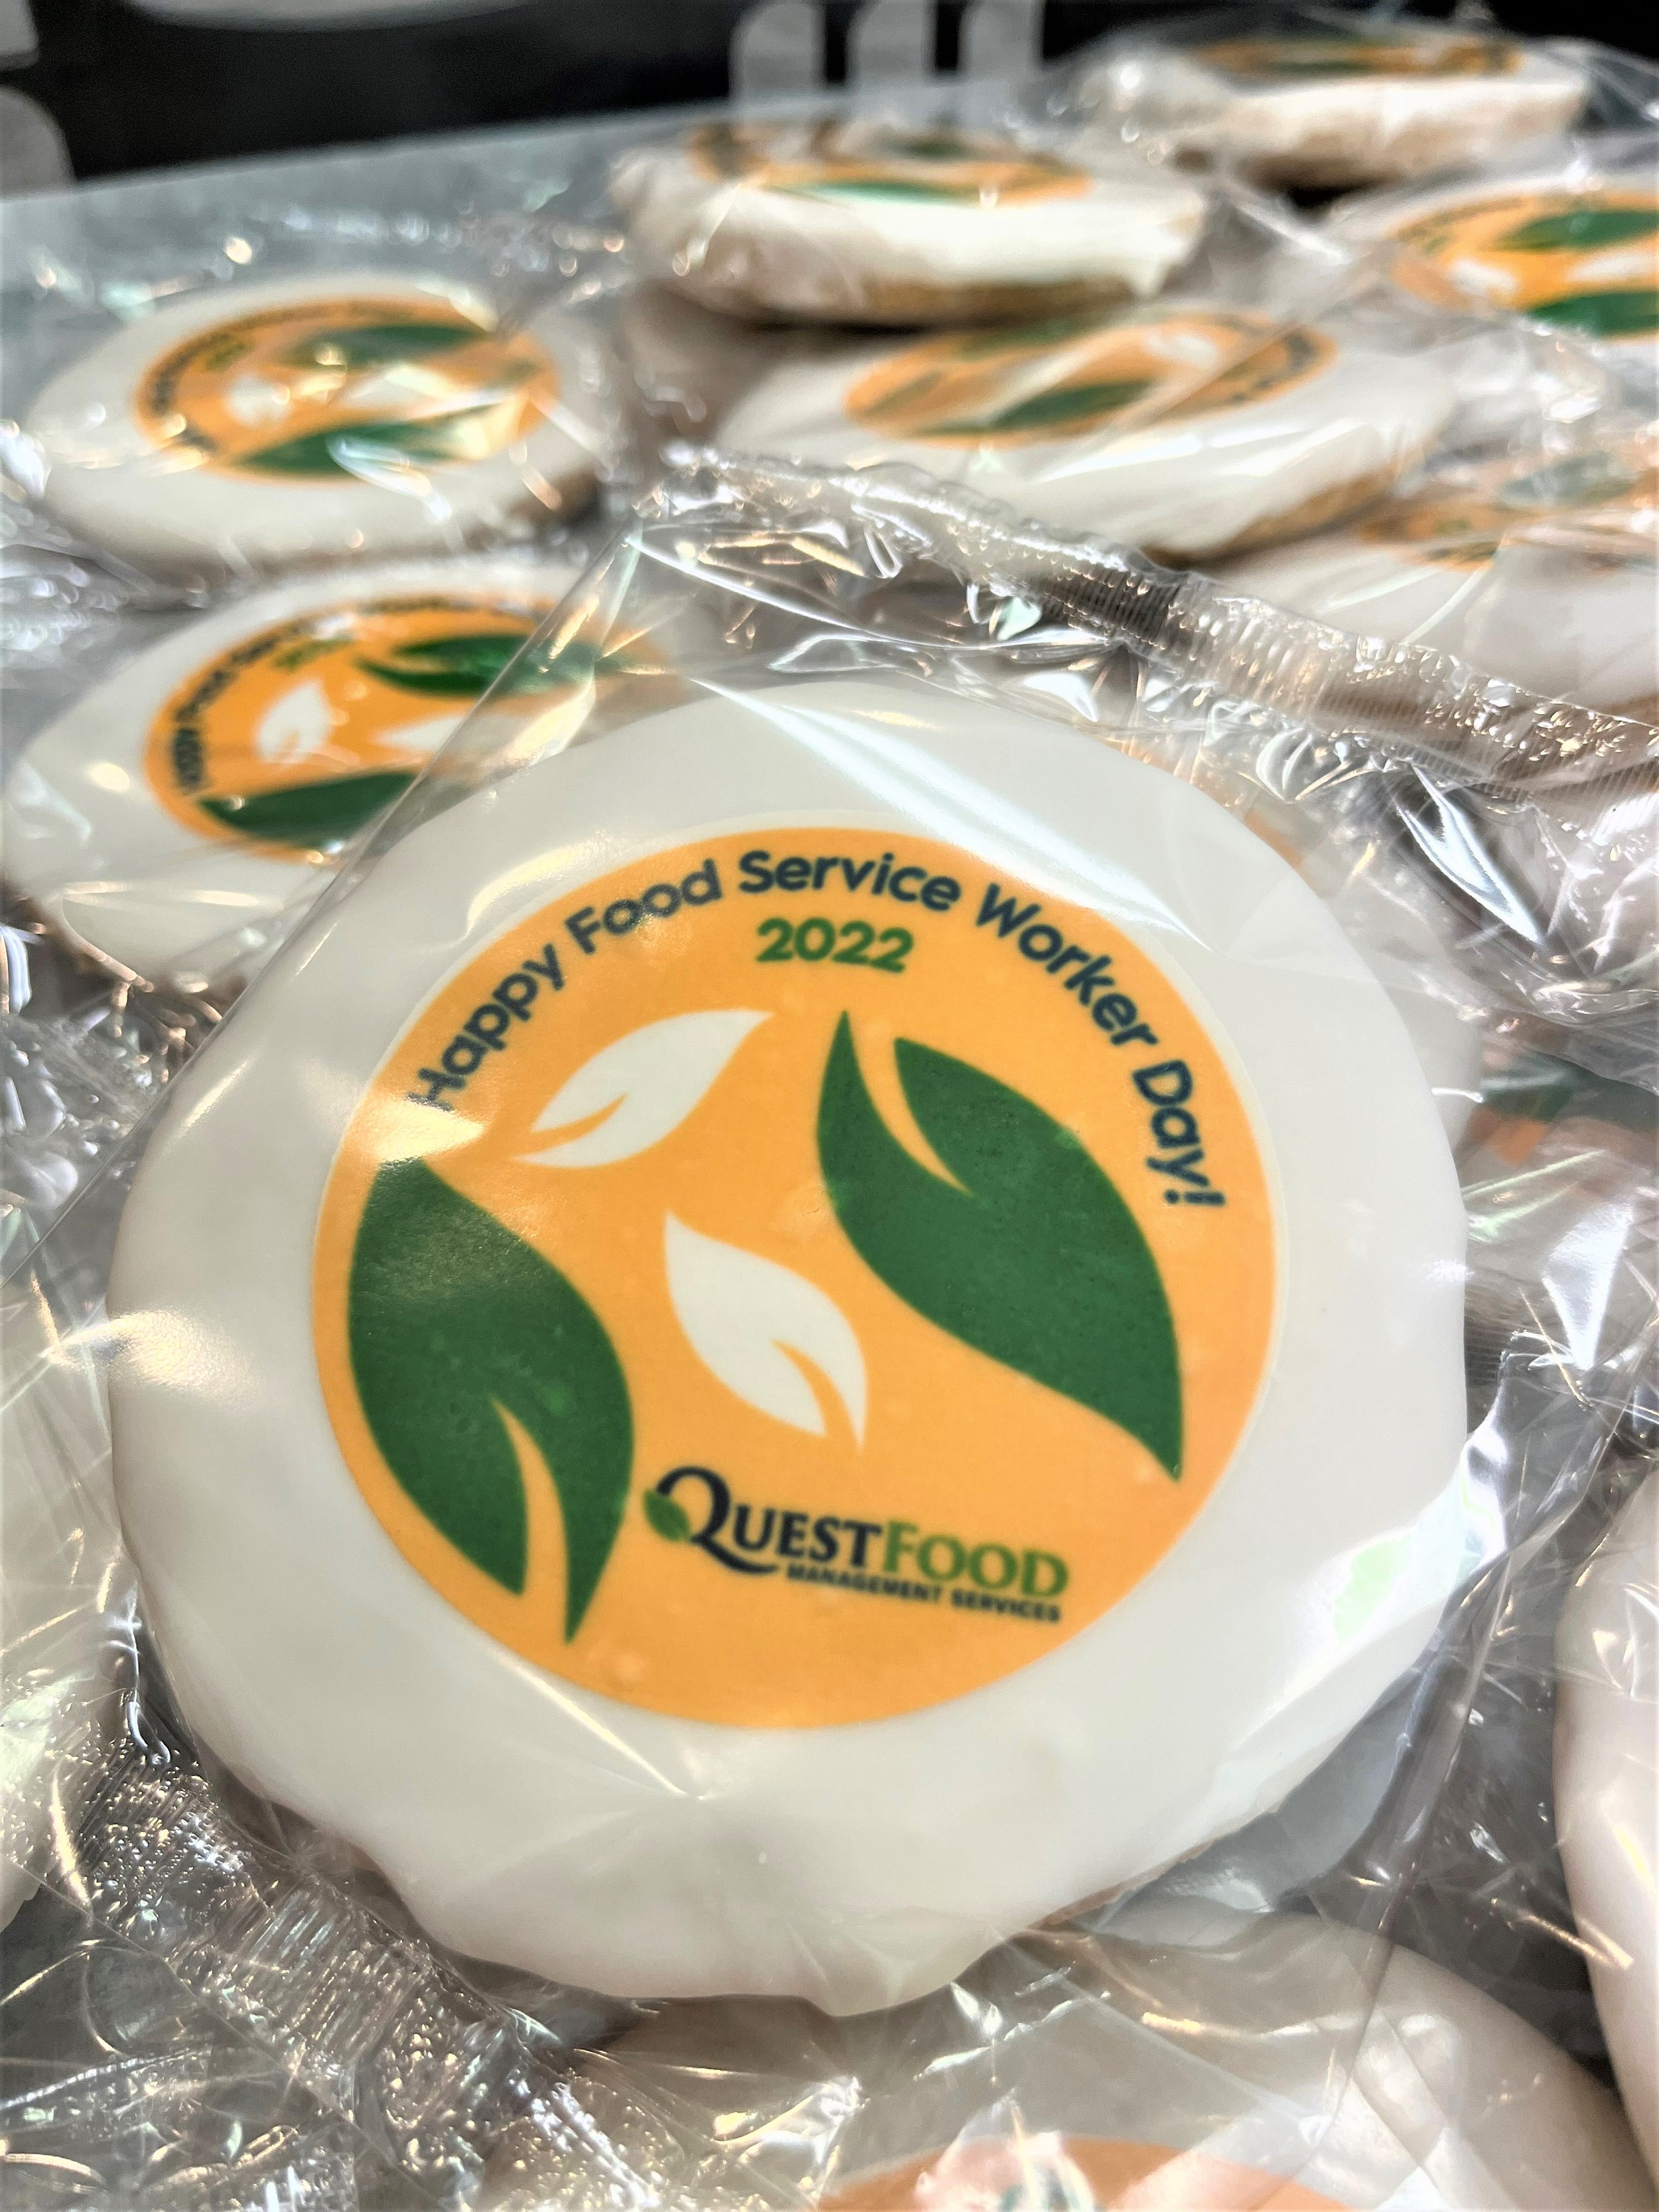 National Food Service Worker Day — Quest Food Management Services